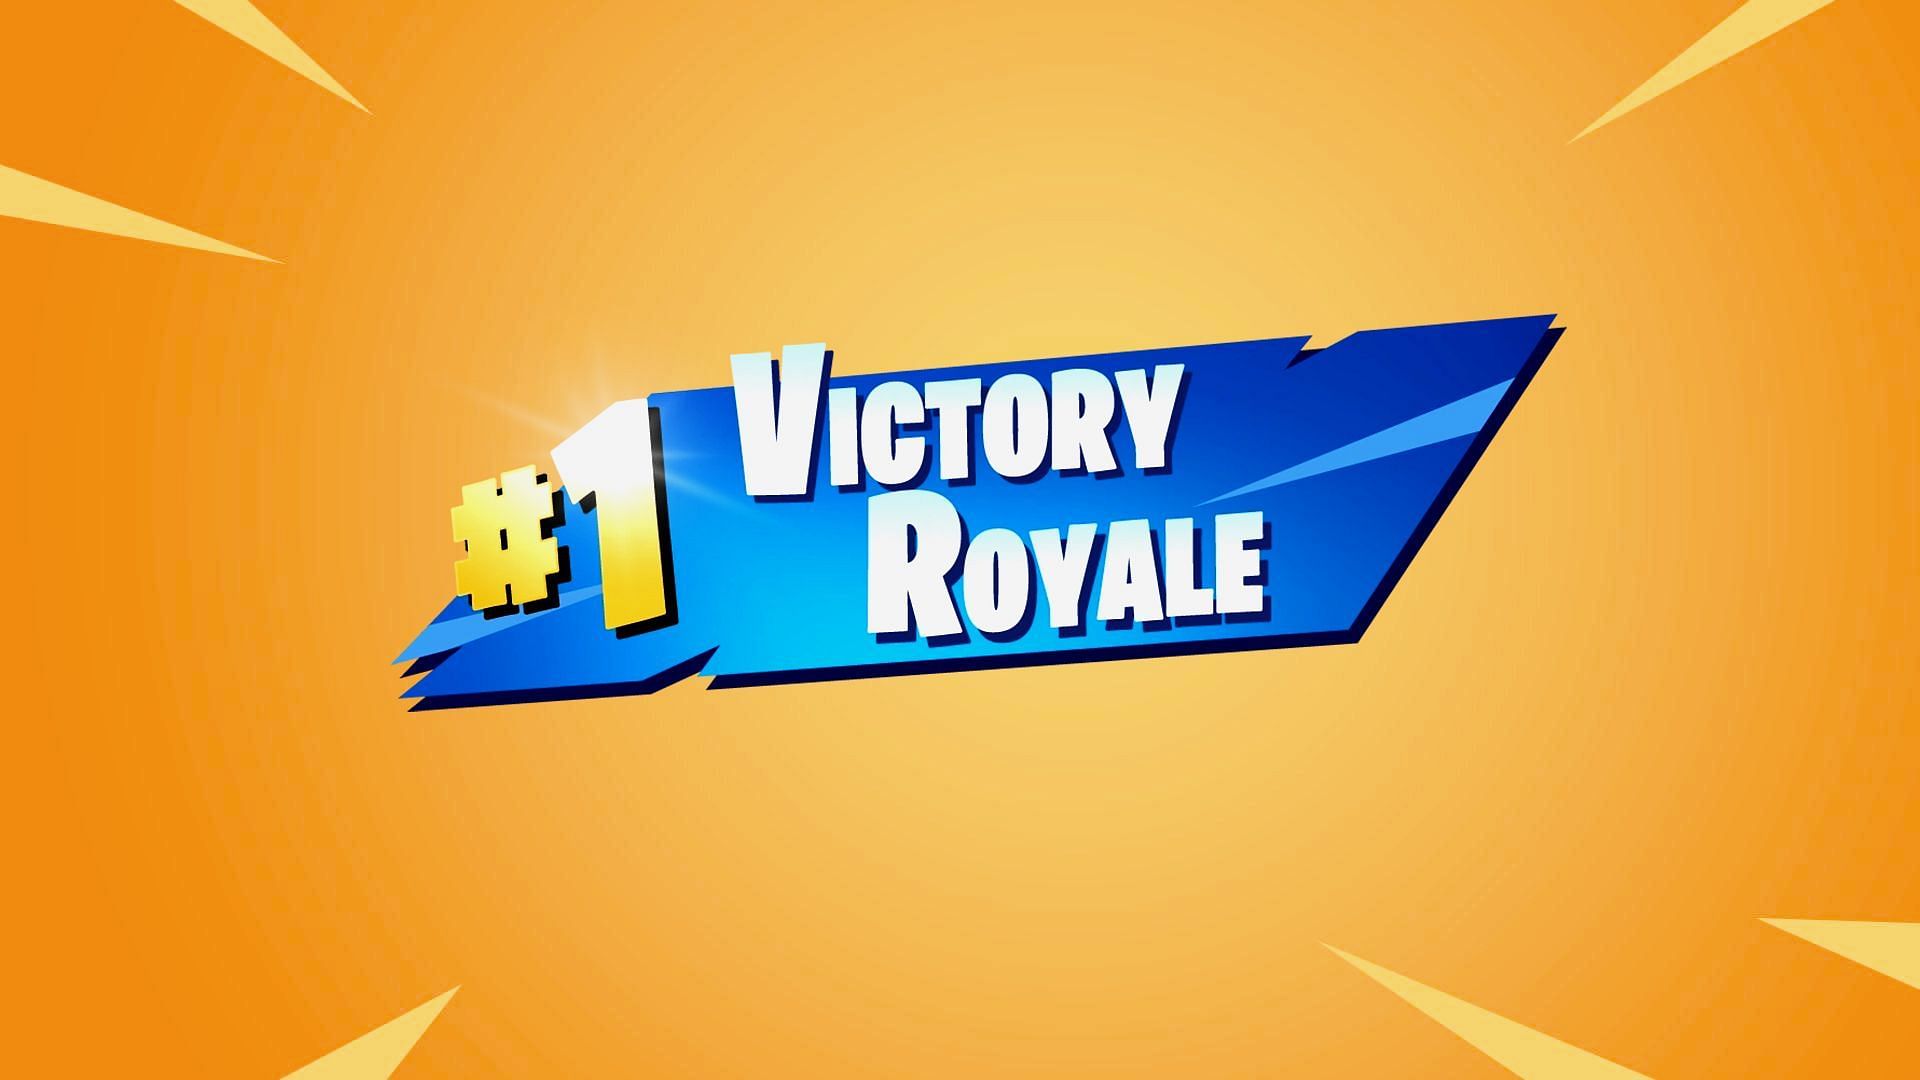 Victory royale picture